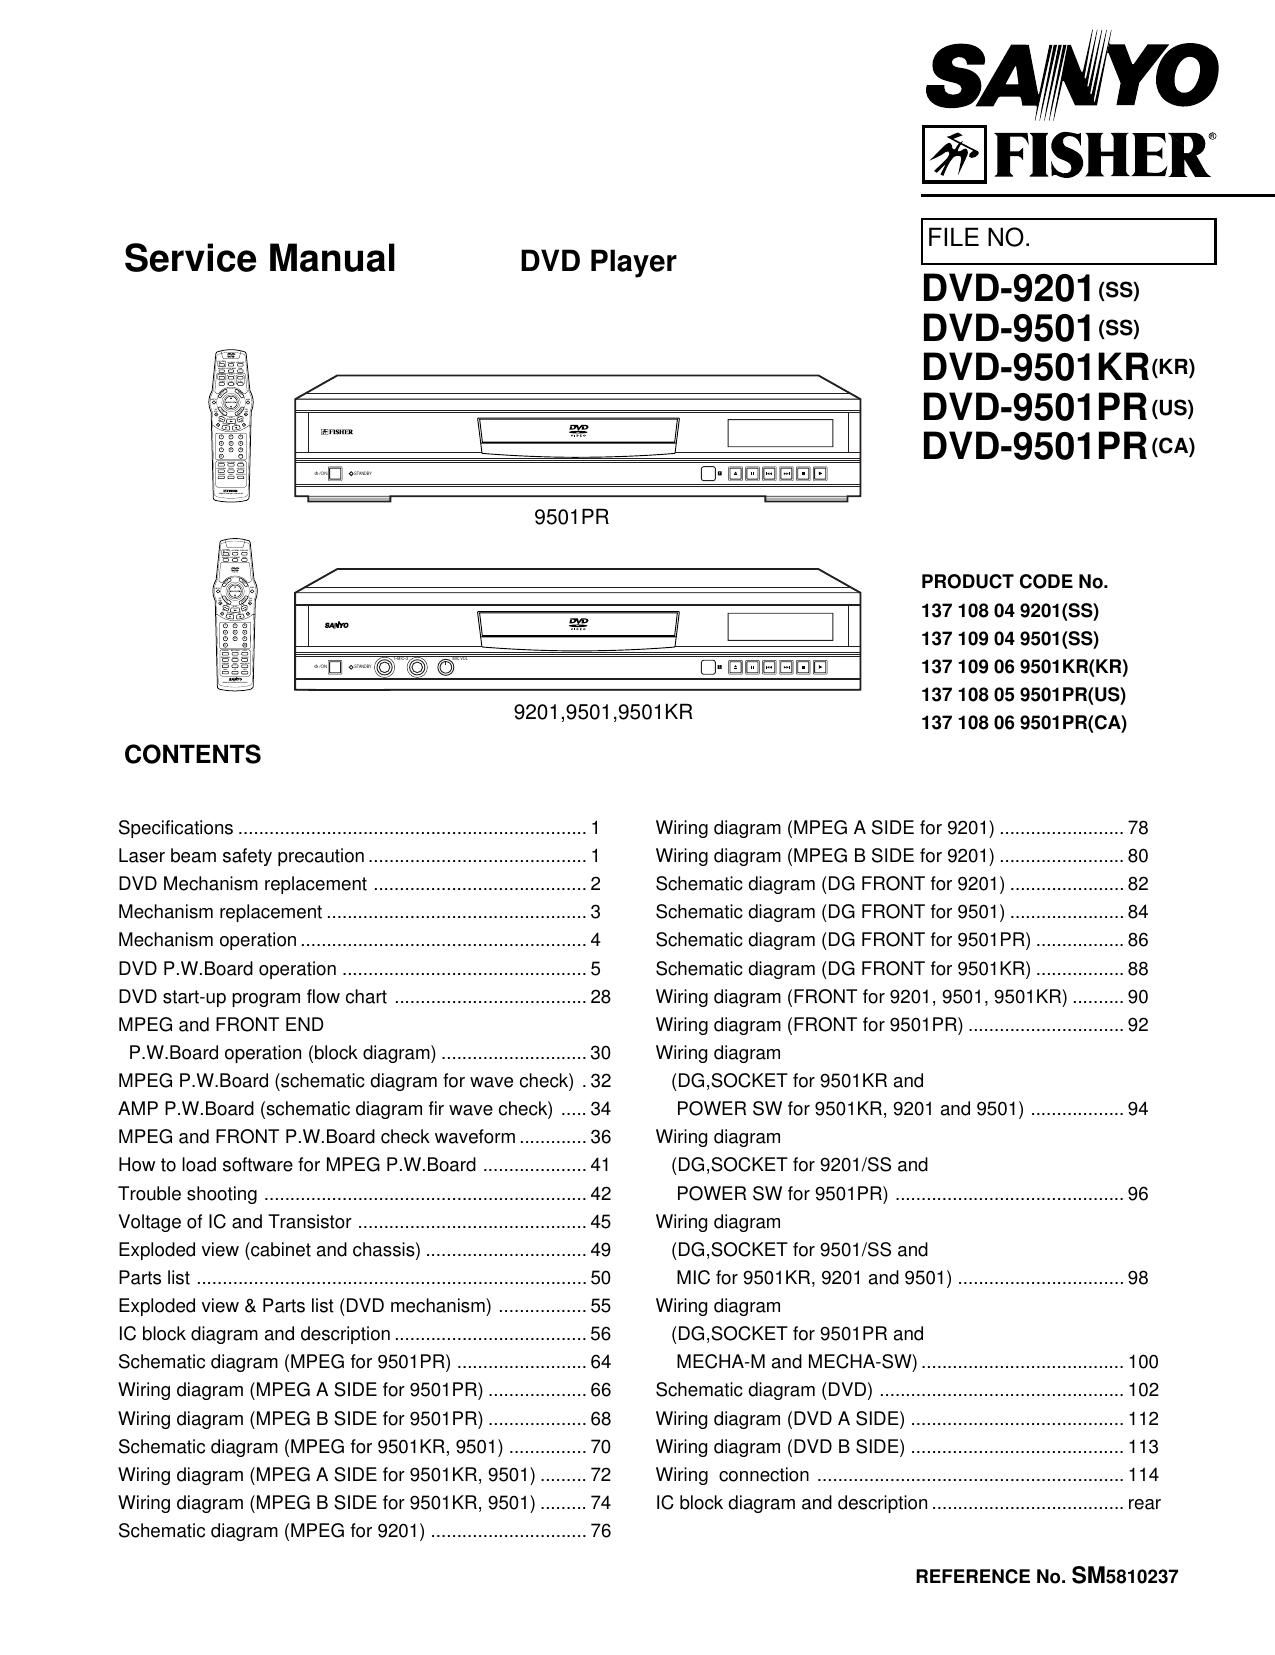 Fisher DVD 9501 Service Manual